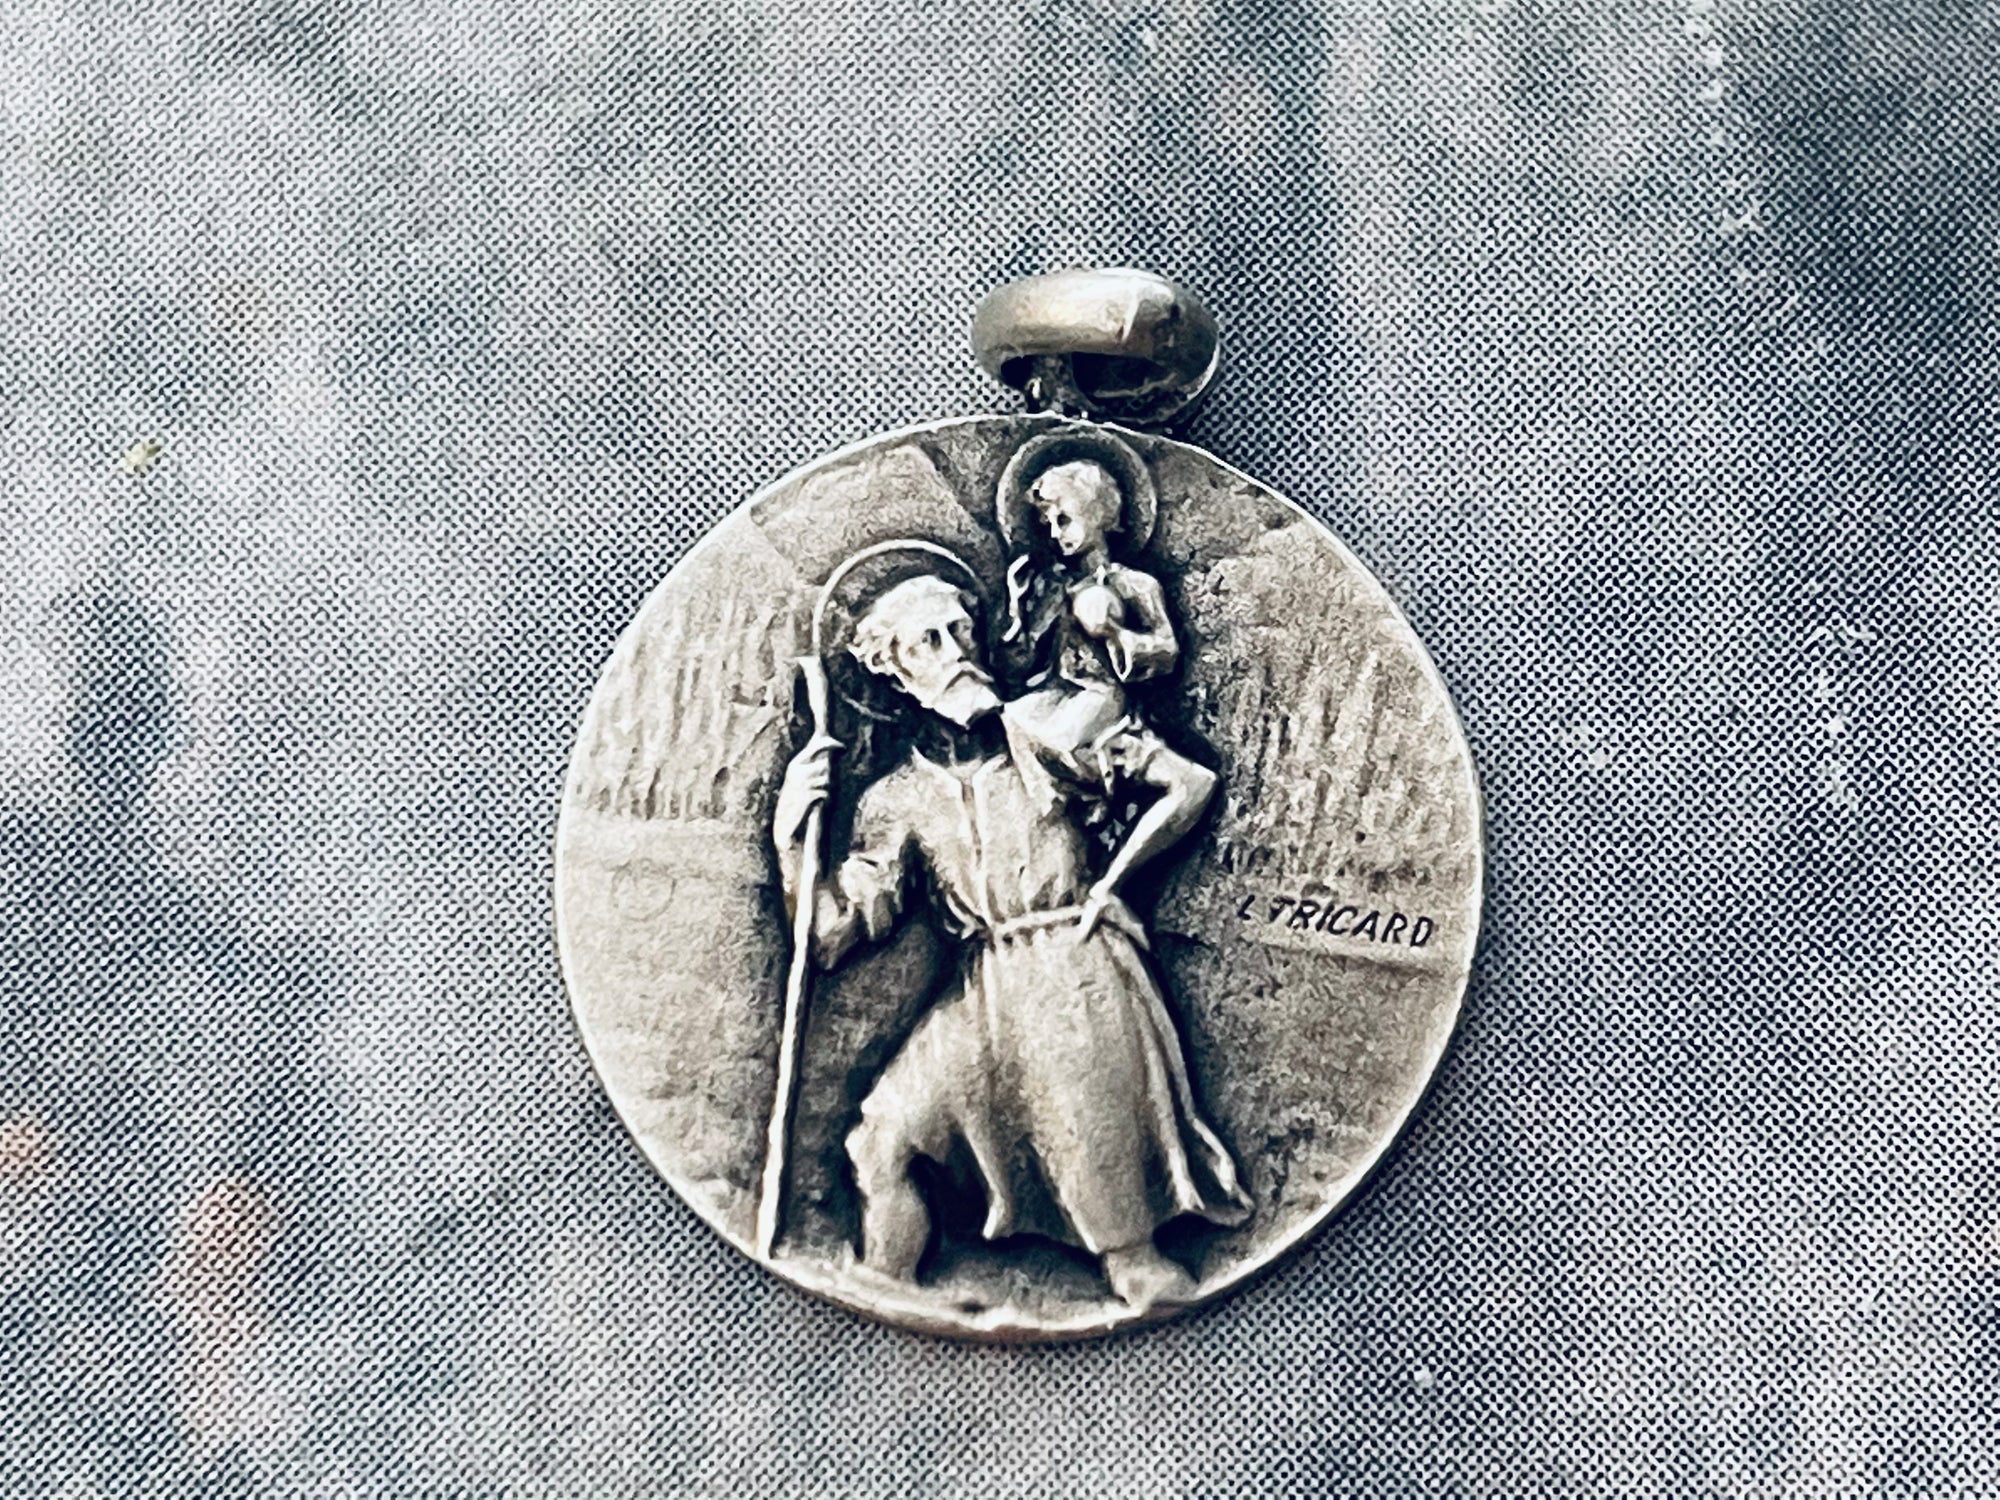 SMALL Vintage French Saint Christopher Medal by L Tricard